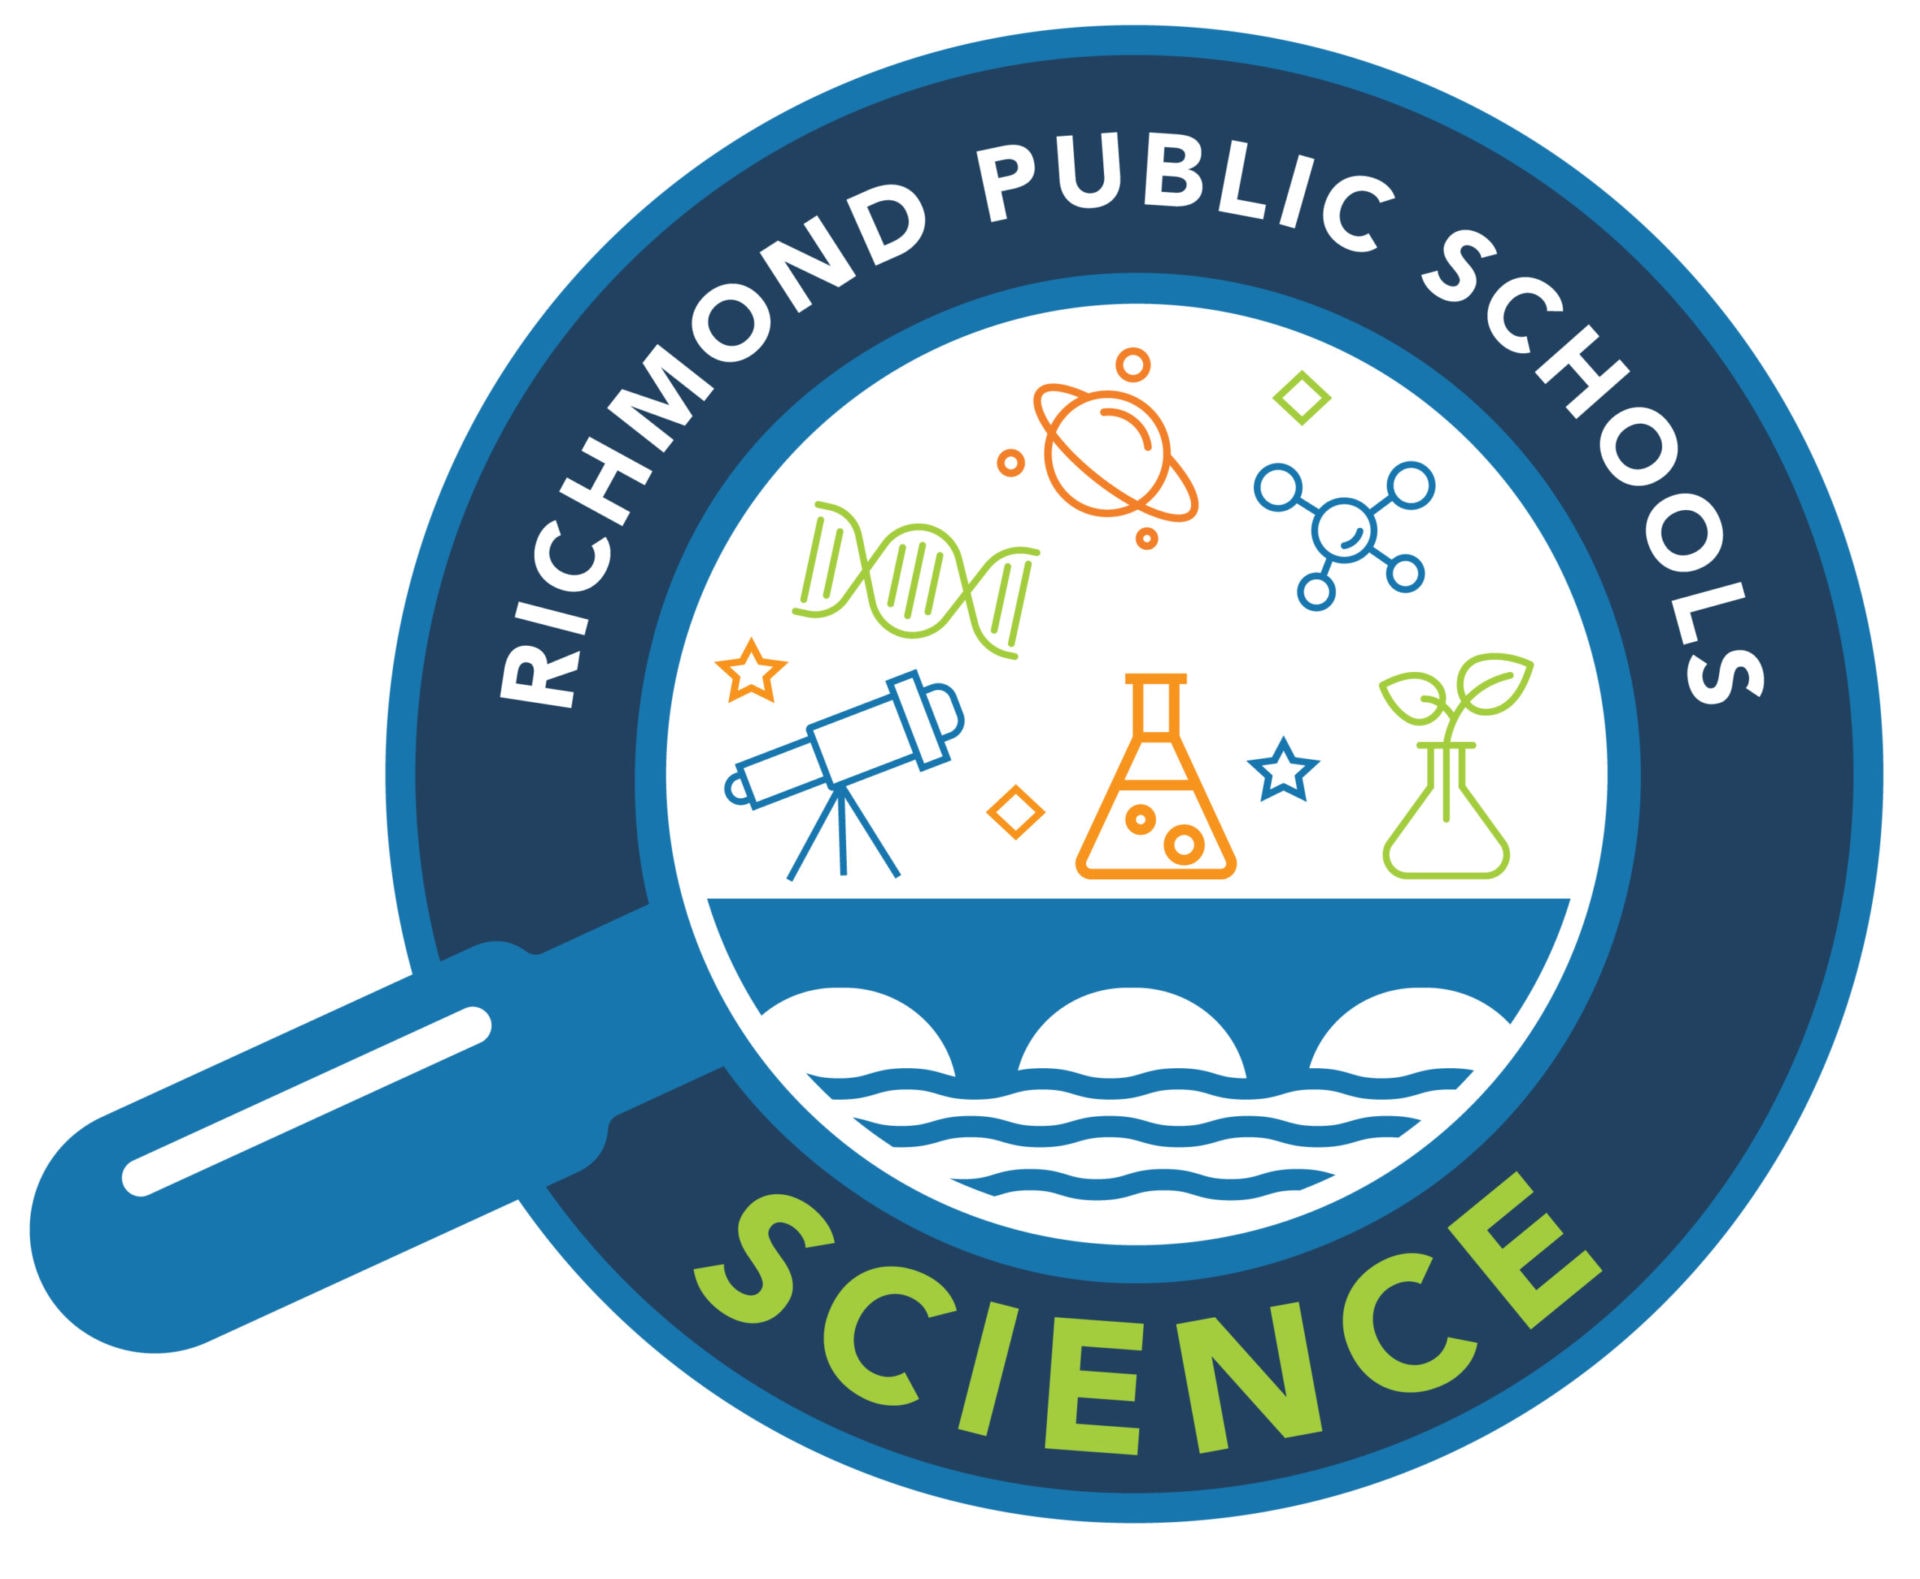 Logo of richmond public schools science, featuring a magnifying glass with scientific symbols and waves, encircled by the school name.